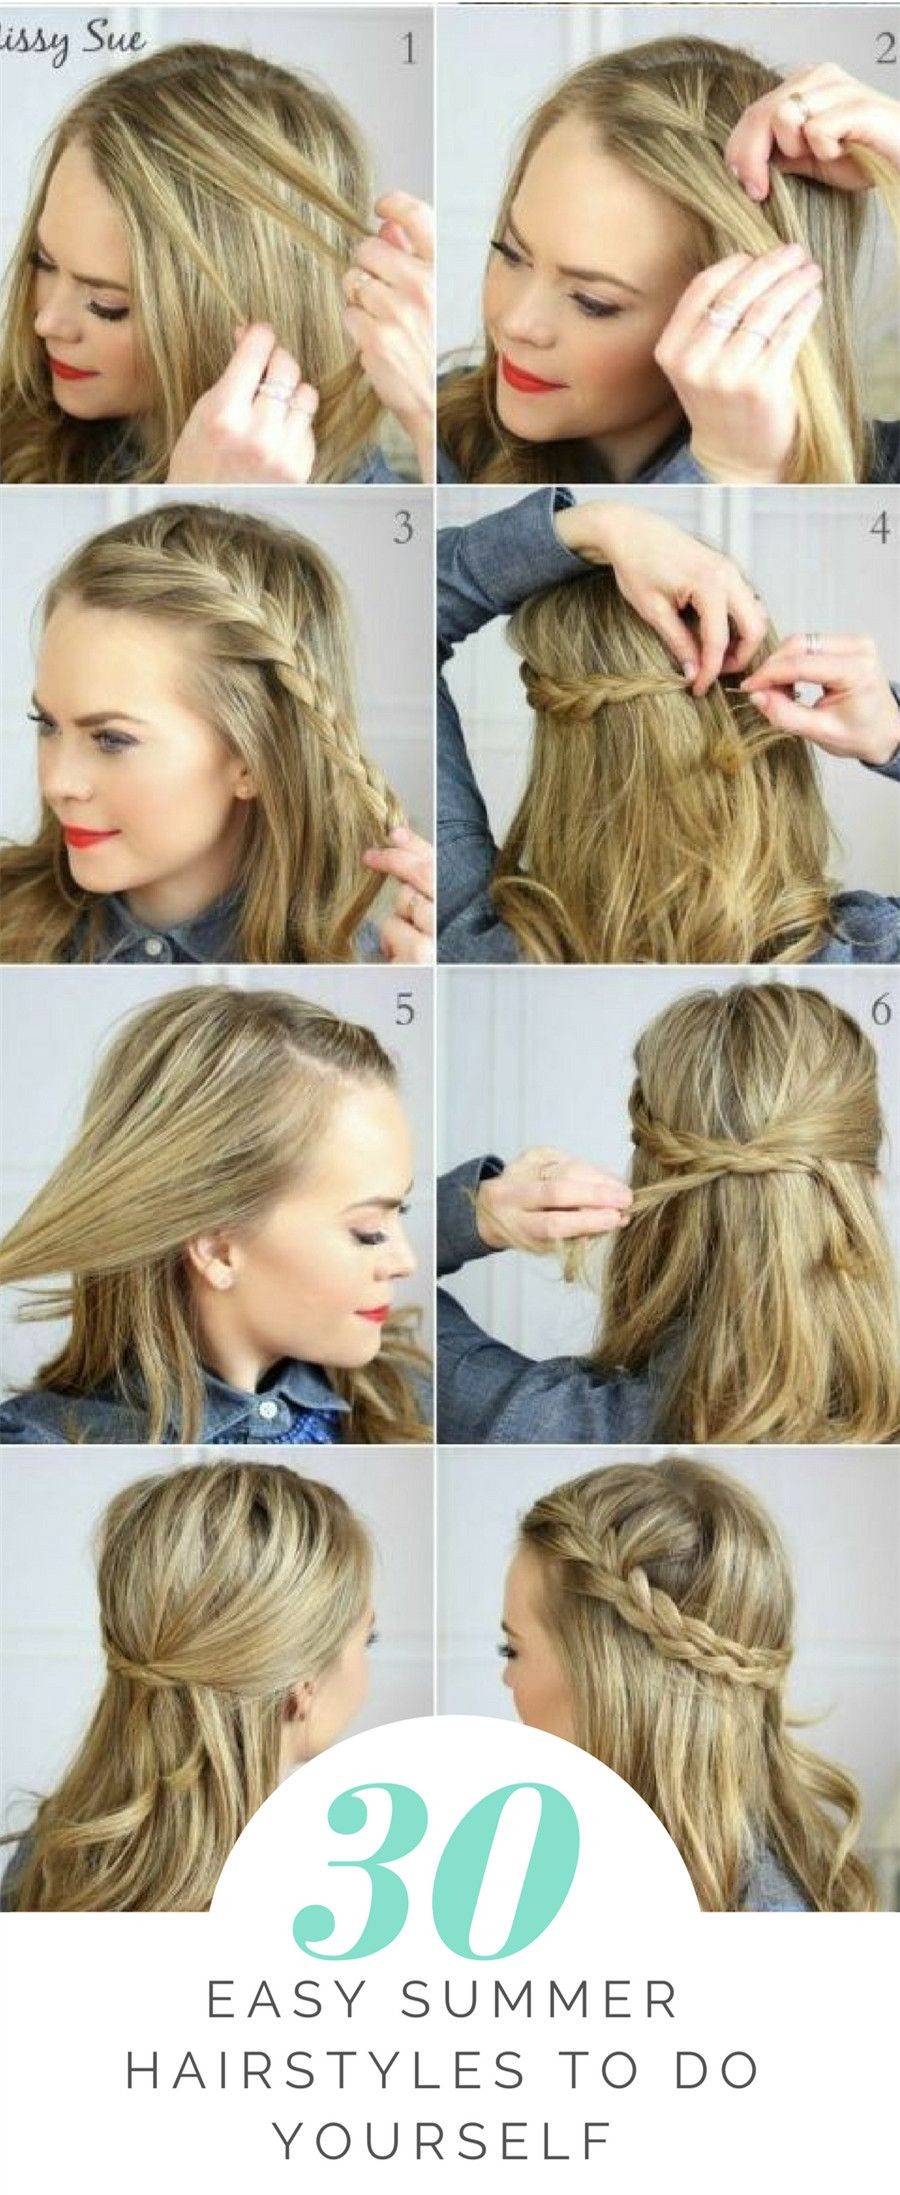 Easy Hairstyles To Do Yourself
 30 Easy Summer Hairstyles to Do Yourself